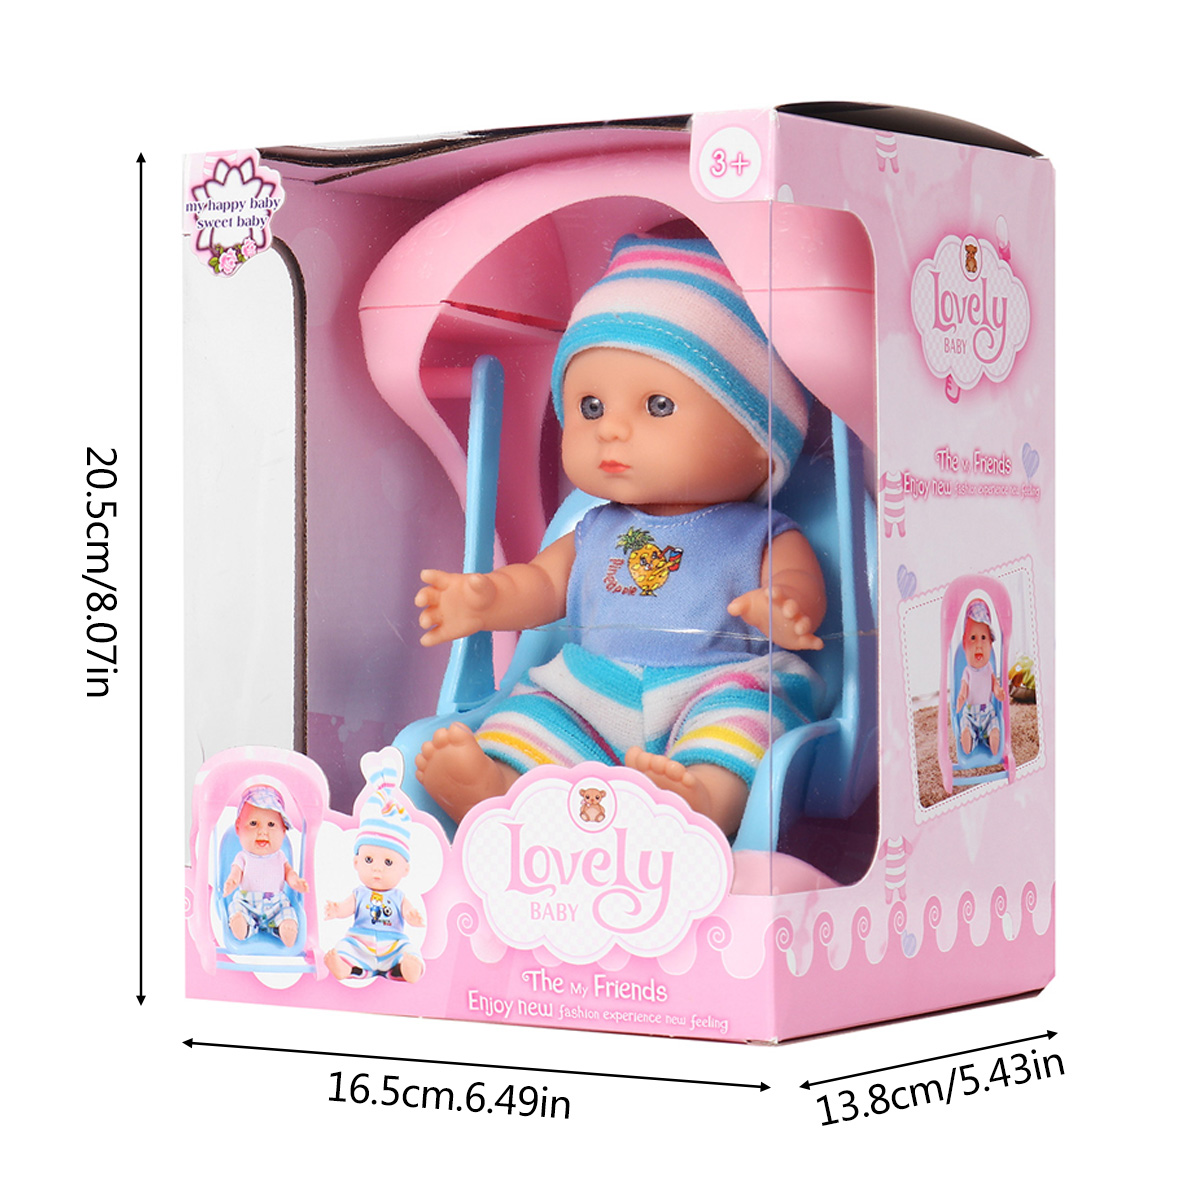 Simulation-Baby-3D-Creative-Cute-Doll-Play-House-Toy-Doll-Vinyl-Doll-Gift-1818655-24